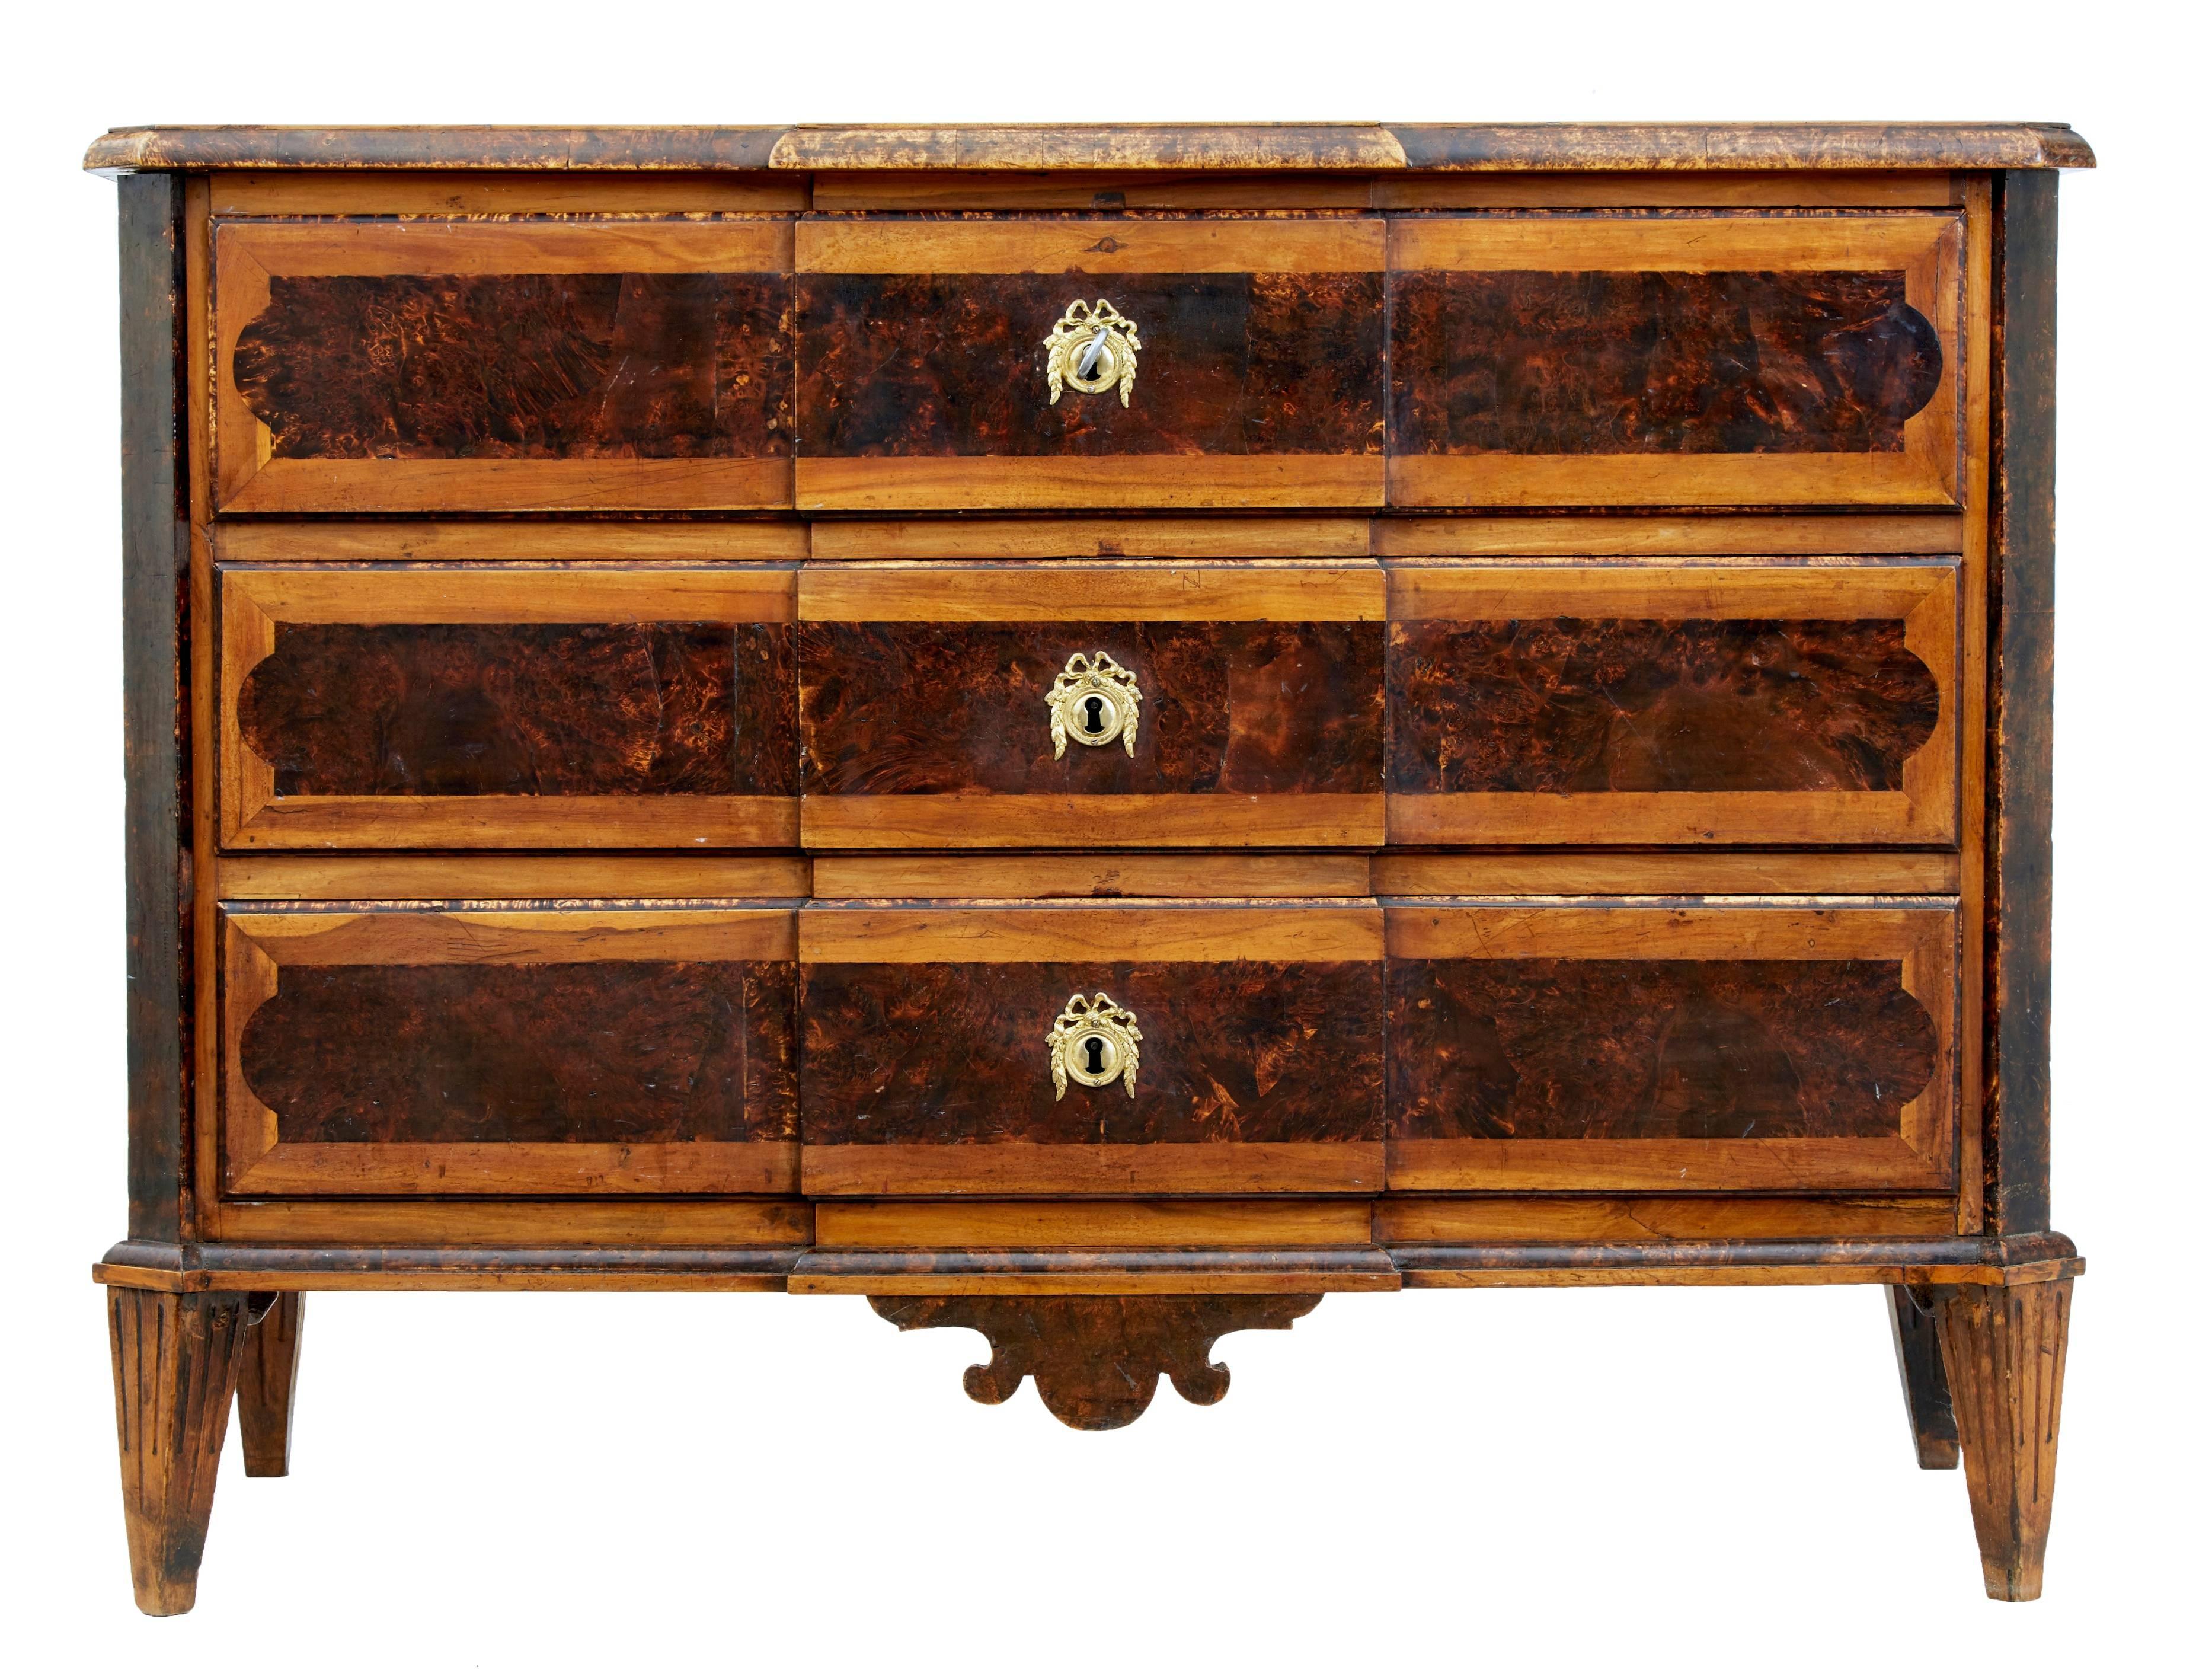 Rare piece of 19th century Swedish furniture, circa 1860.
Three drawer commode in birch and contrasting alder root veneers.
Original color and patina.
Drawers open on the key.
Standing on fluted tapering legs.

Measures: Height 31 1/4